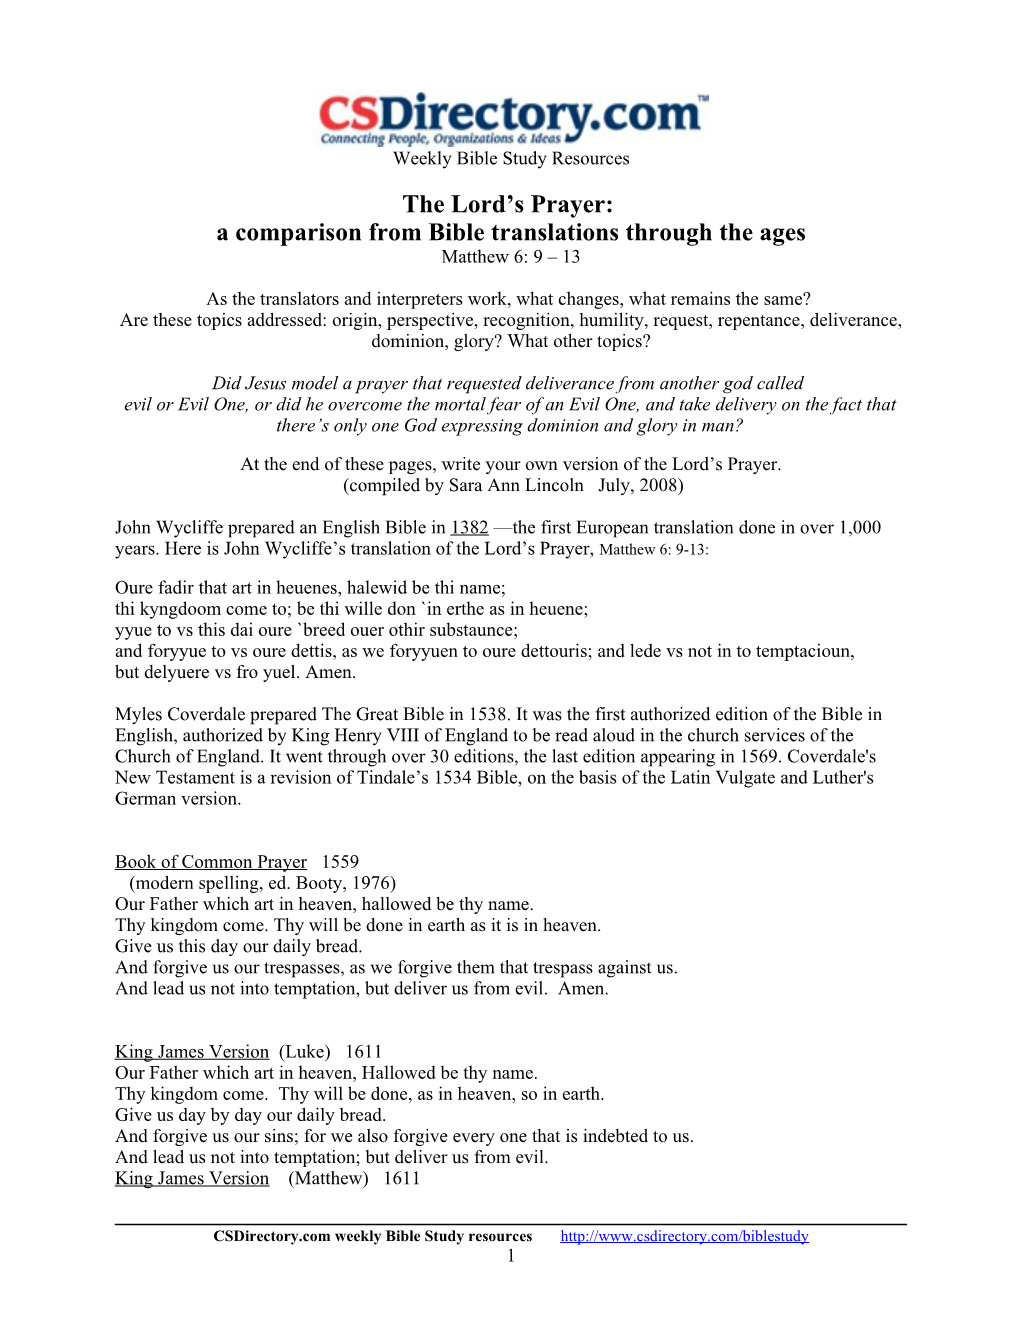 The Lord S Prayer: a Comparison from Bible Translations Through the Ages